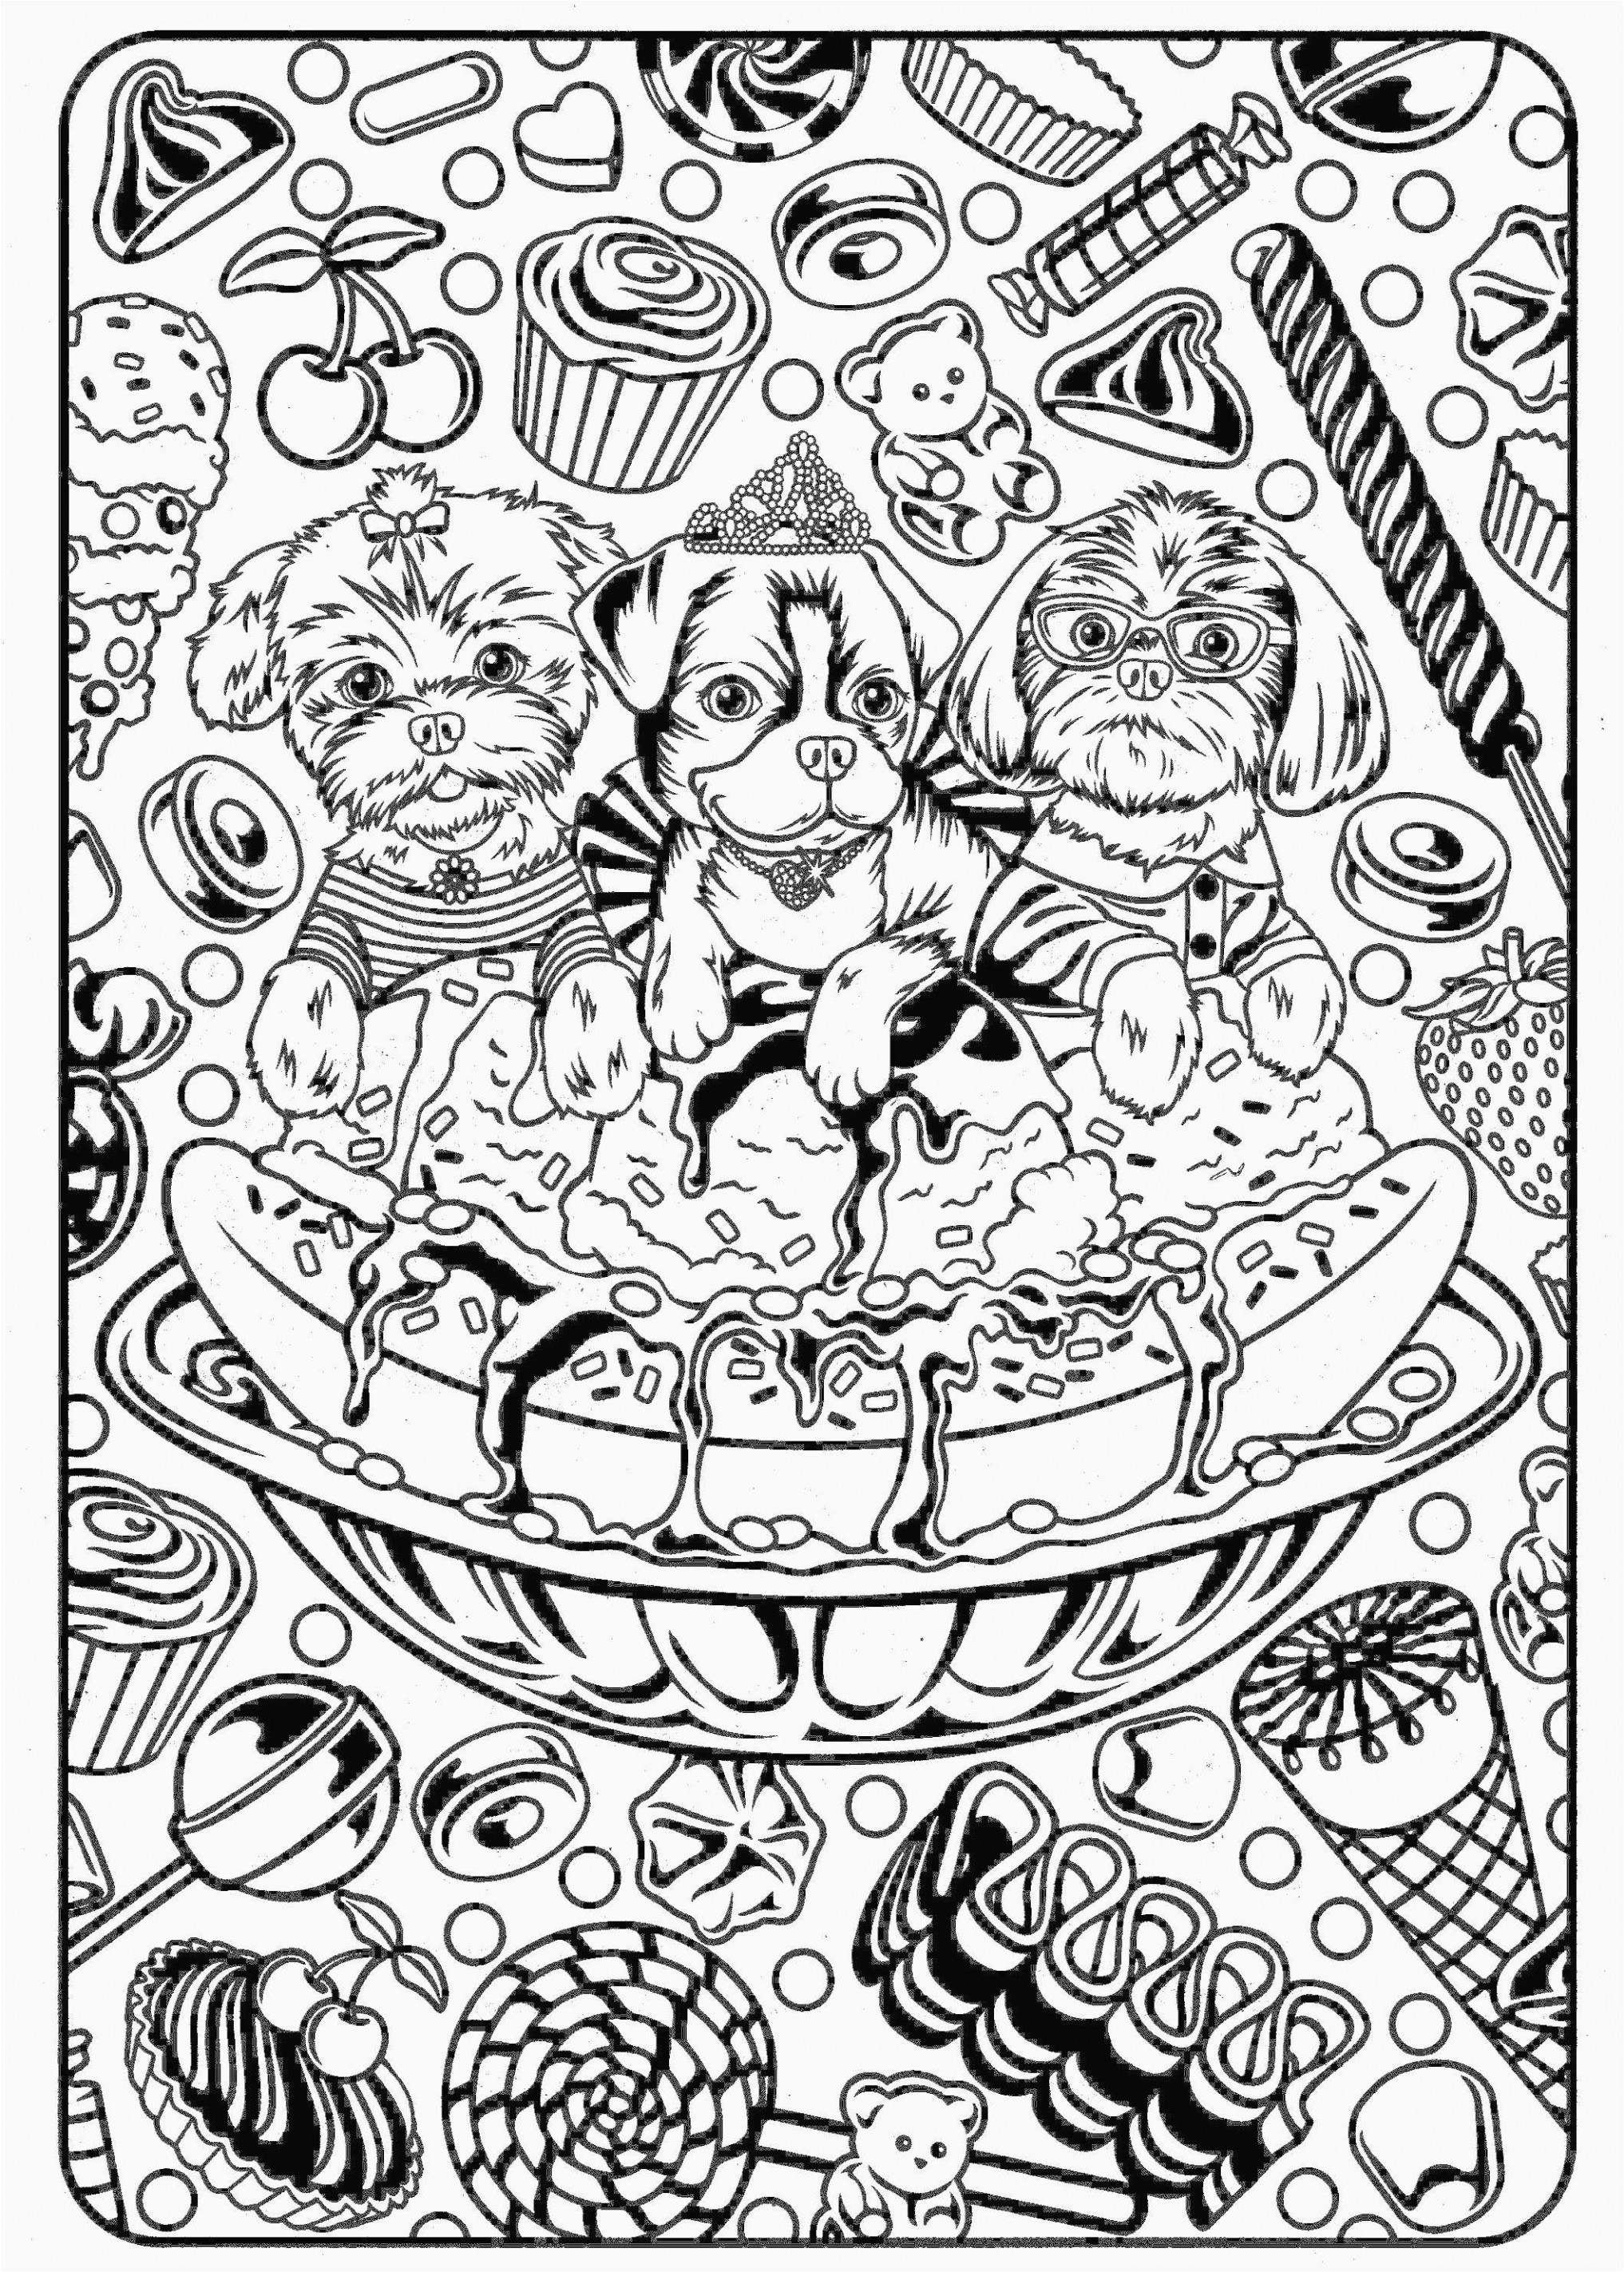 Drawing Xylophone Xylophone Coloring Page Www Allanlichtman Com